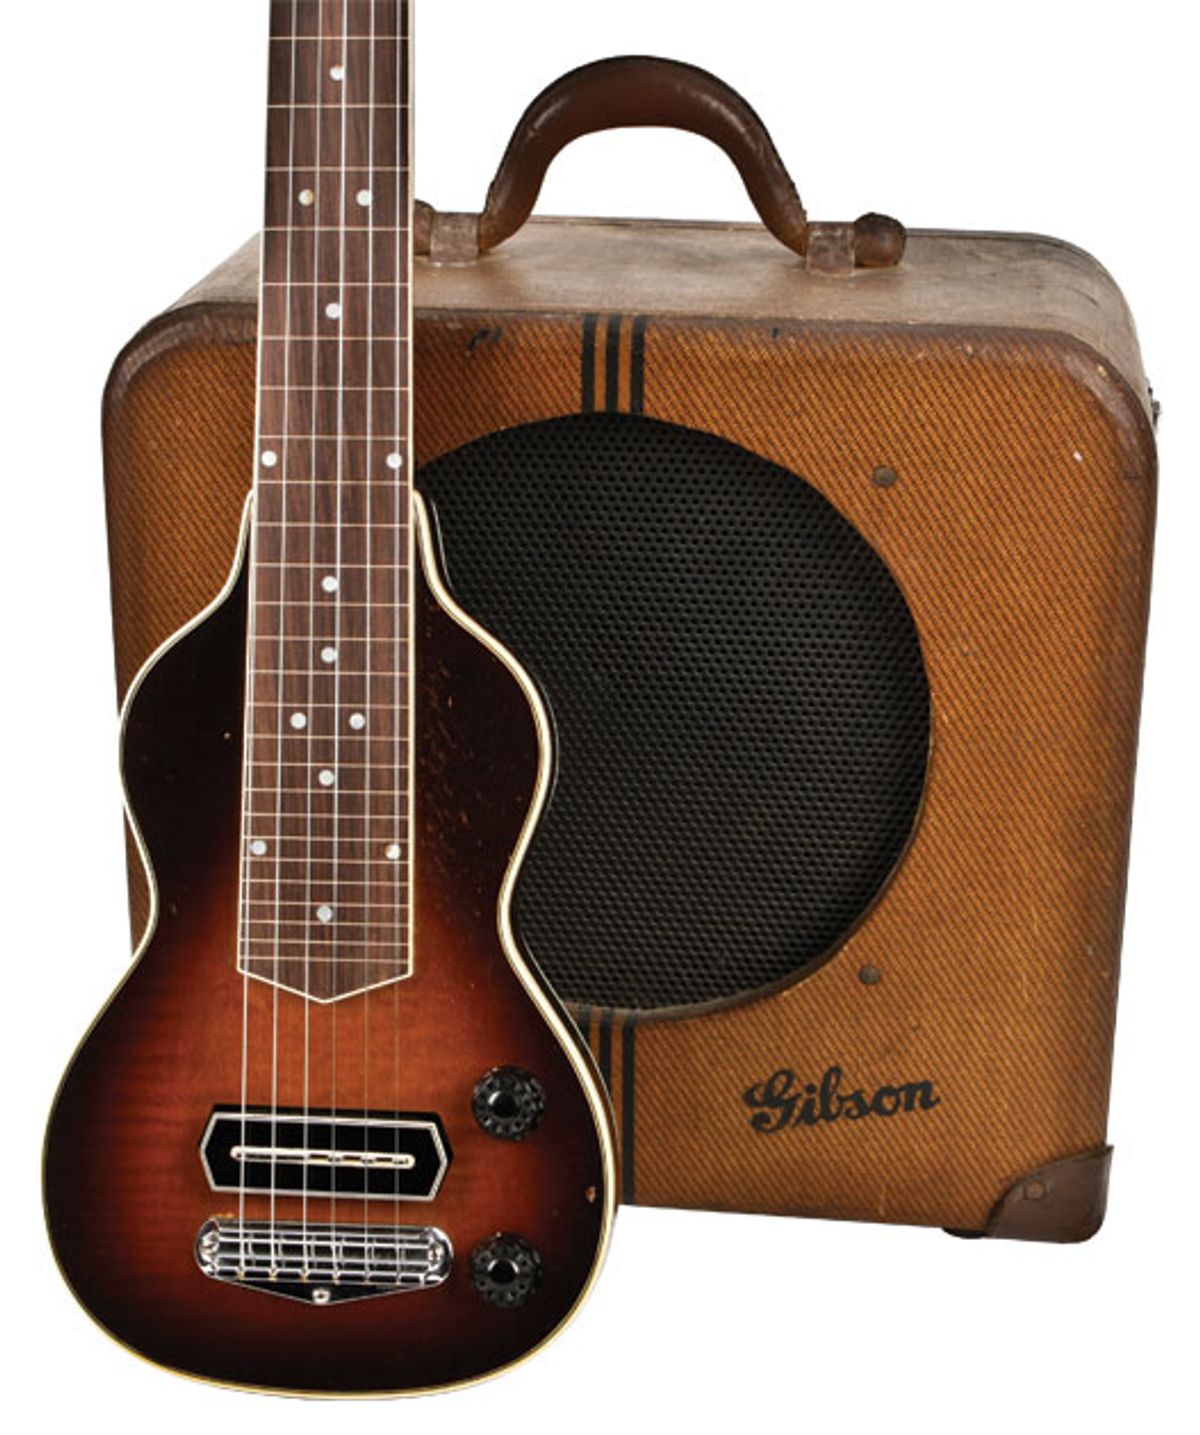 Vintage Vault: 1937 Gibson EH-150 Guitar and Amp